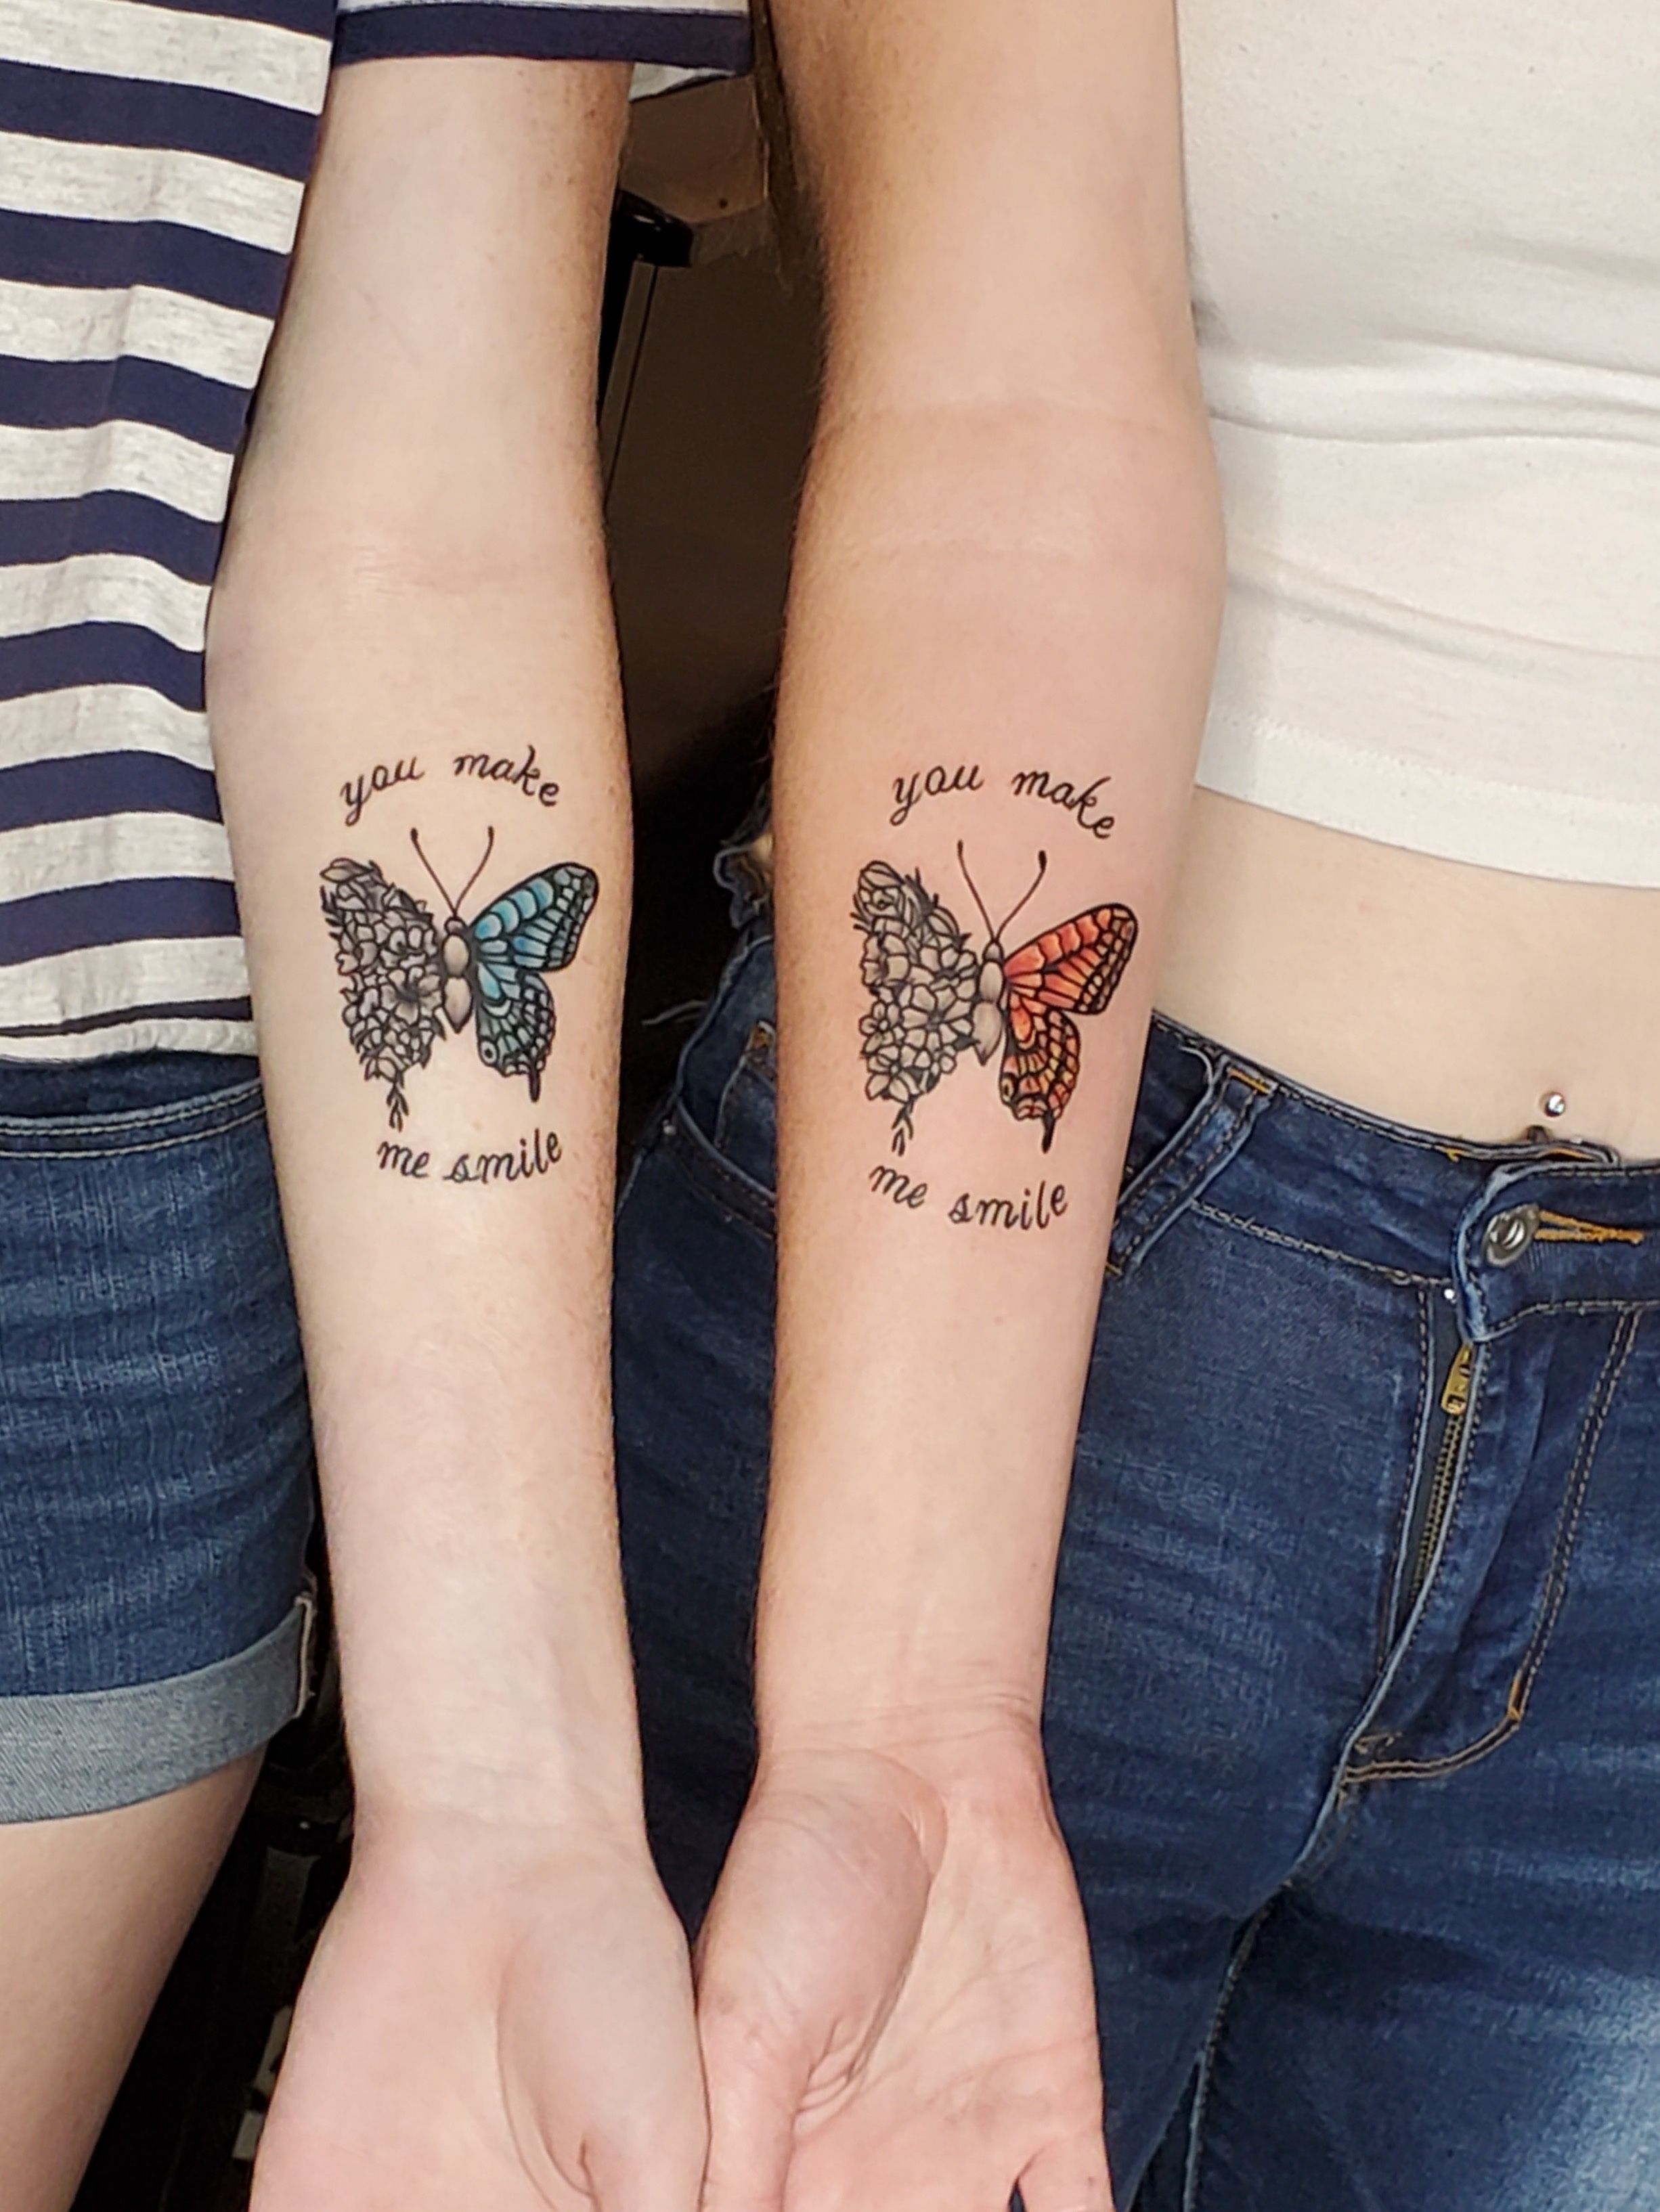 Best friends in tears over matching butterfly tattoos which look xrated   Birmingham Live